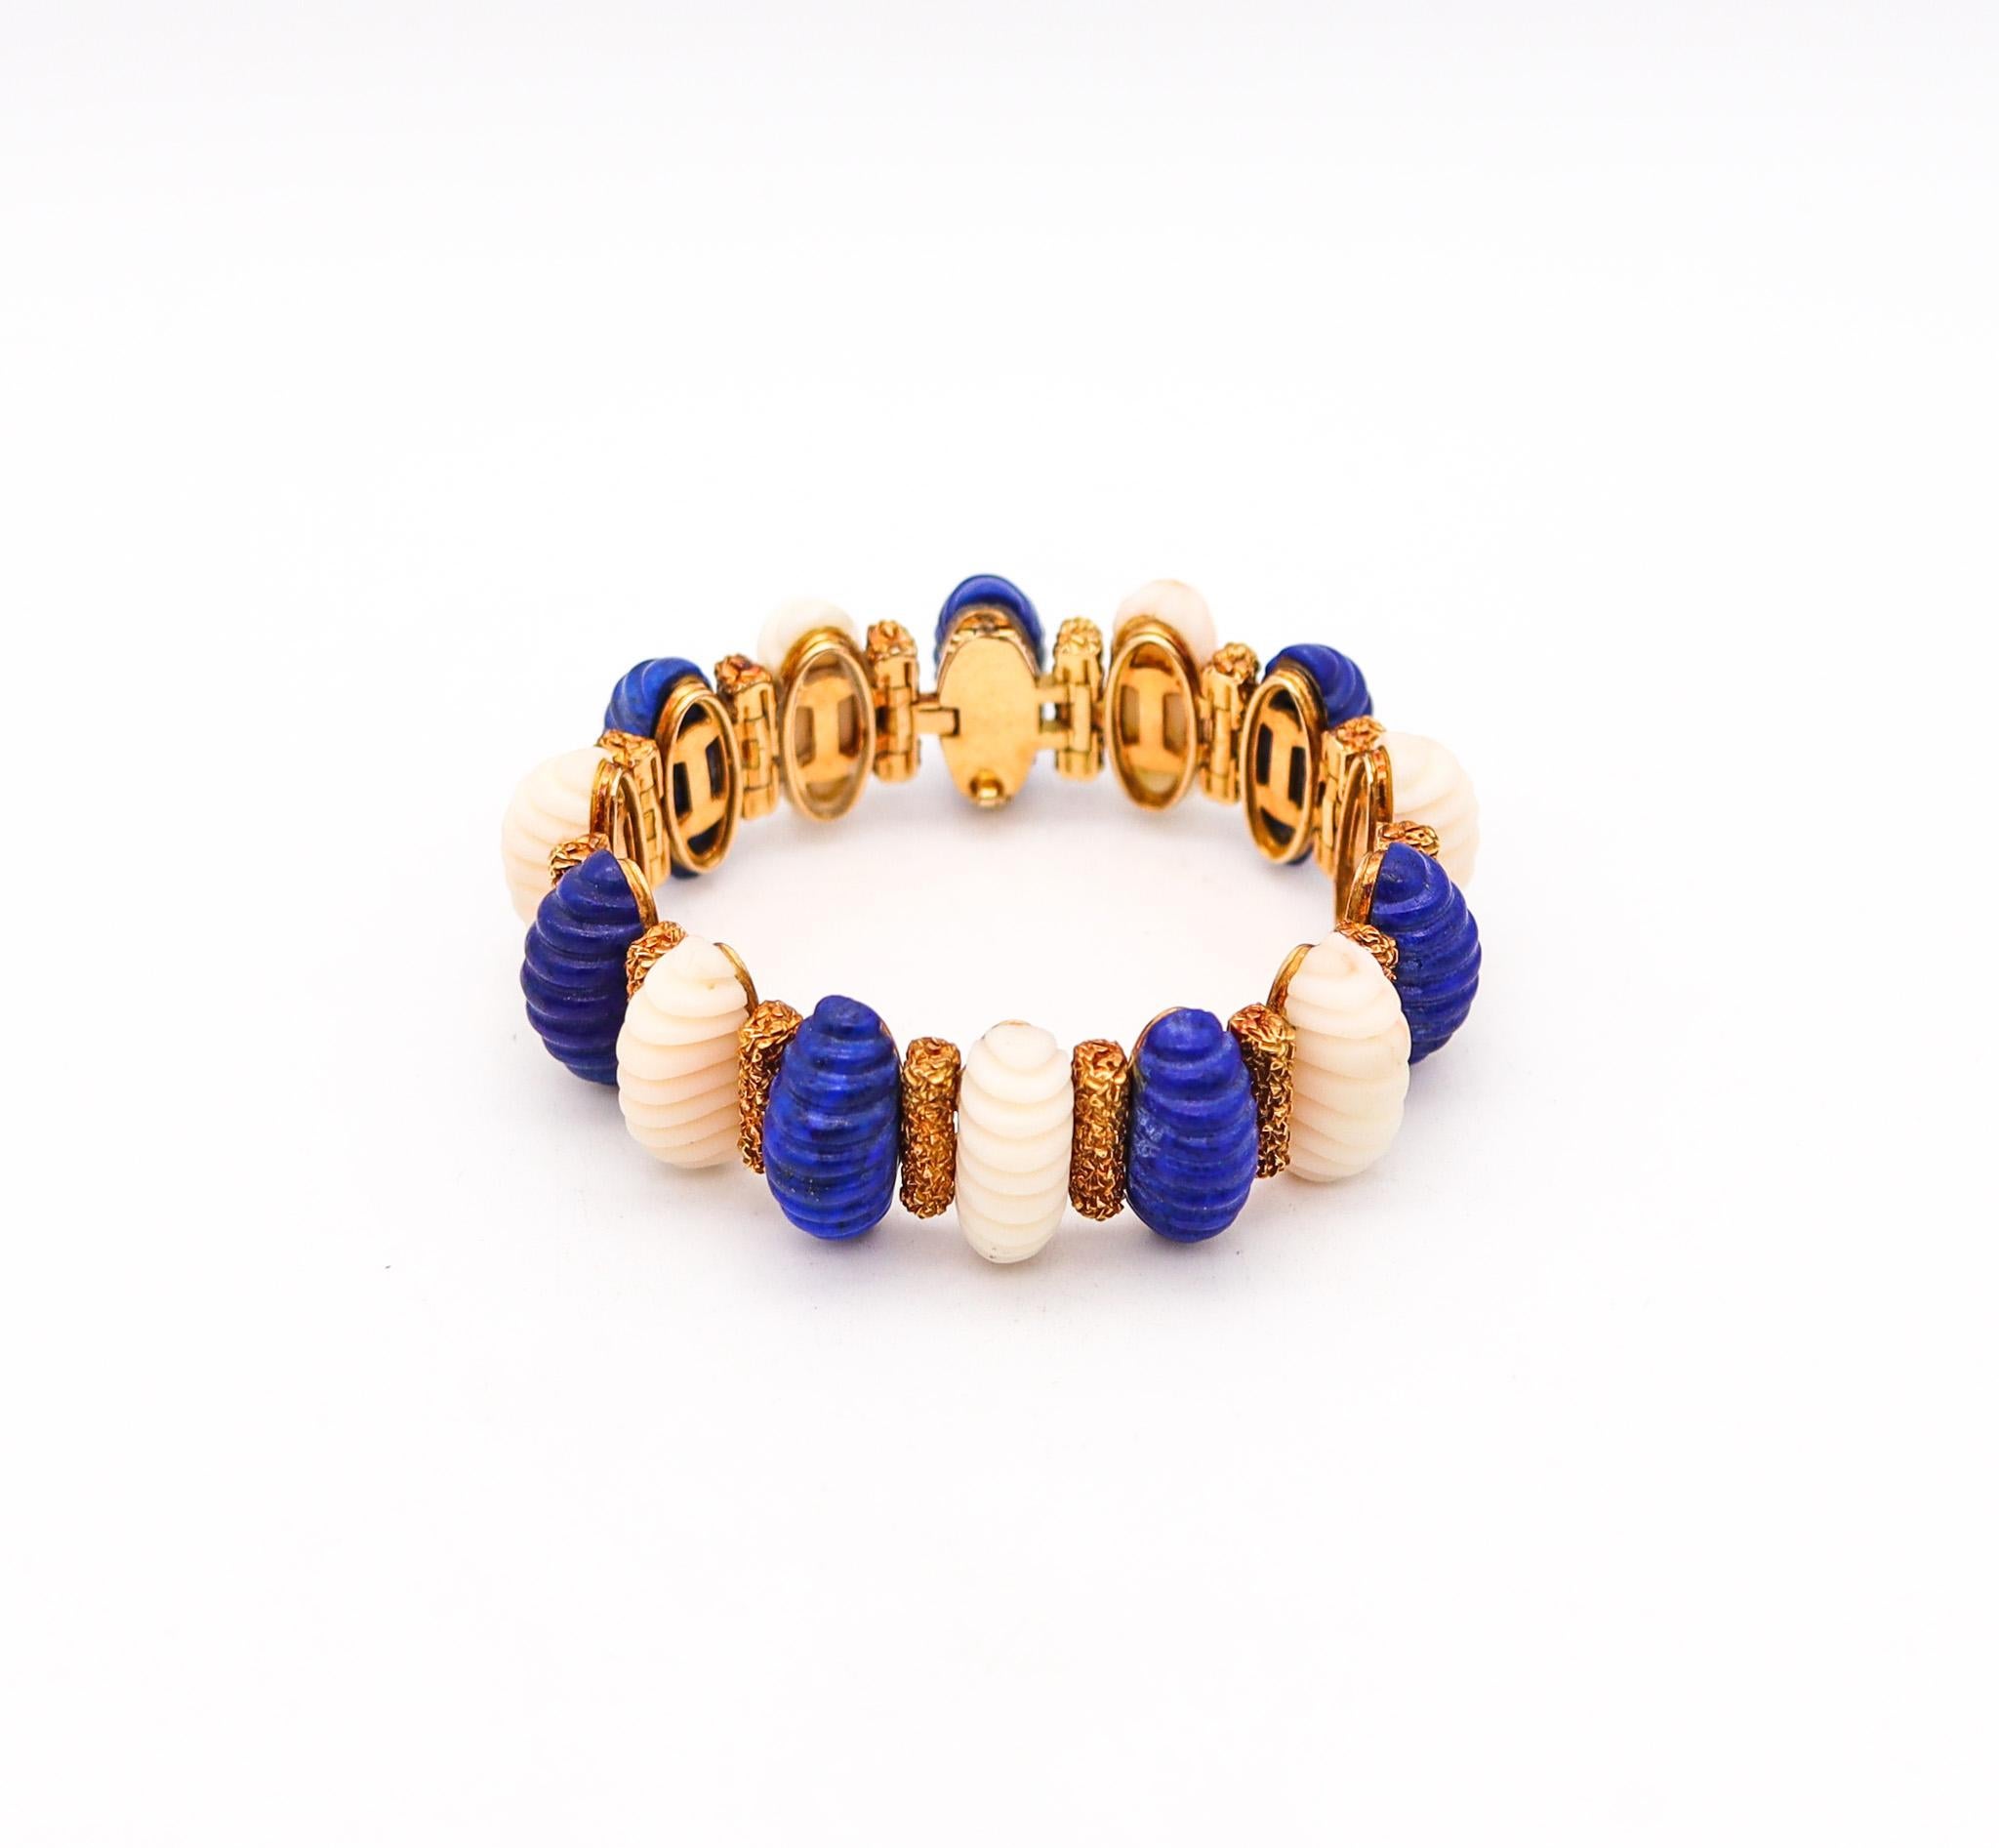 Modernist French 1960 Retro modernist Bracelet In 18Kt Gold With 77 Ctw In Lapis And Coral For Sale